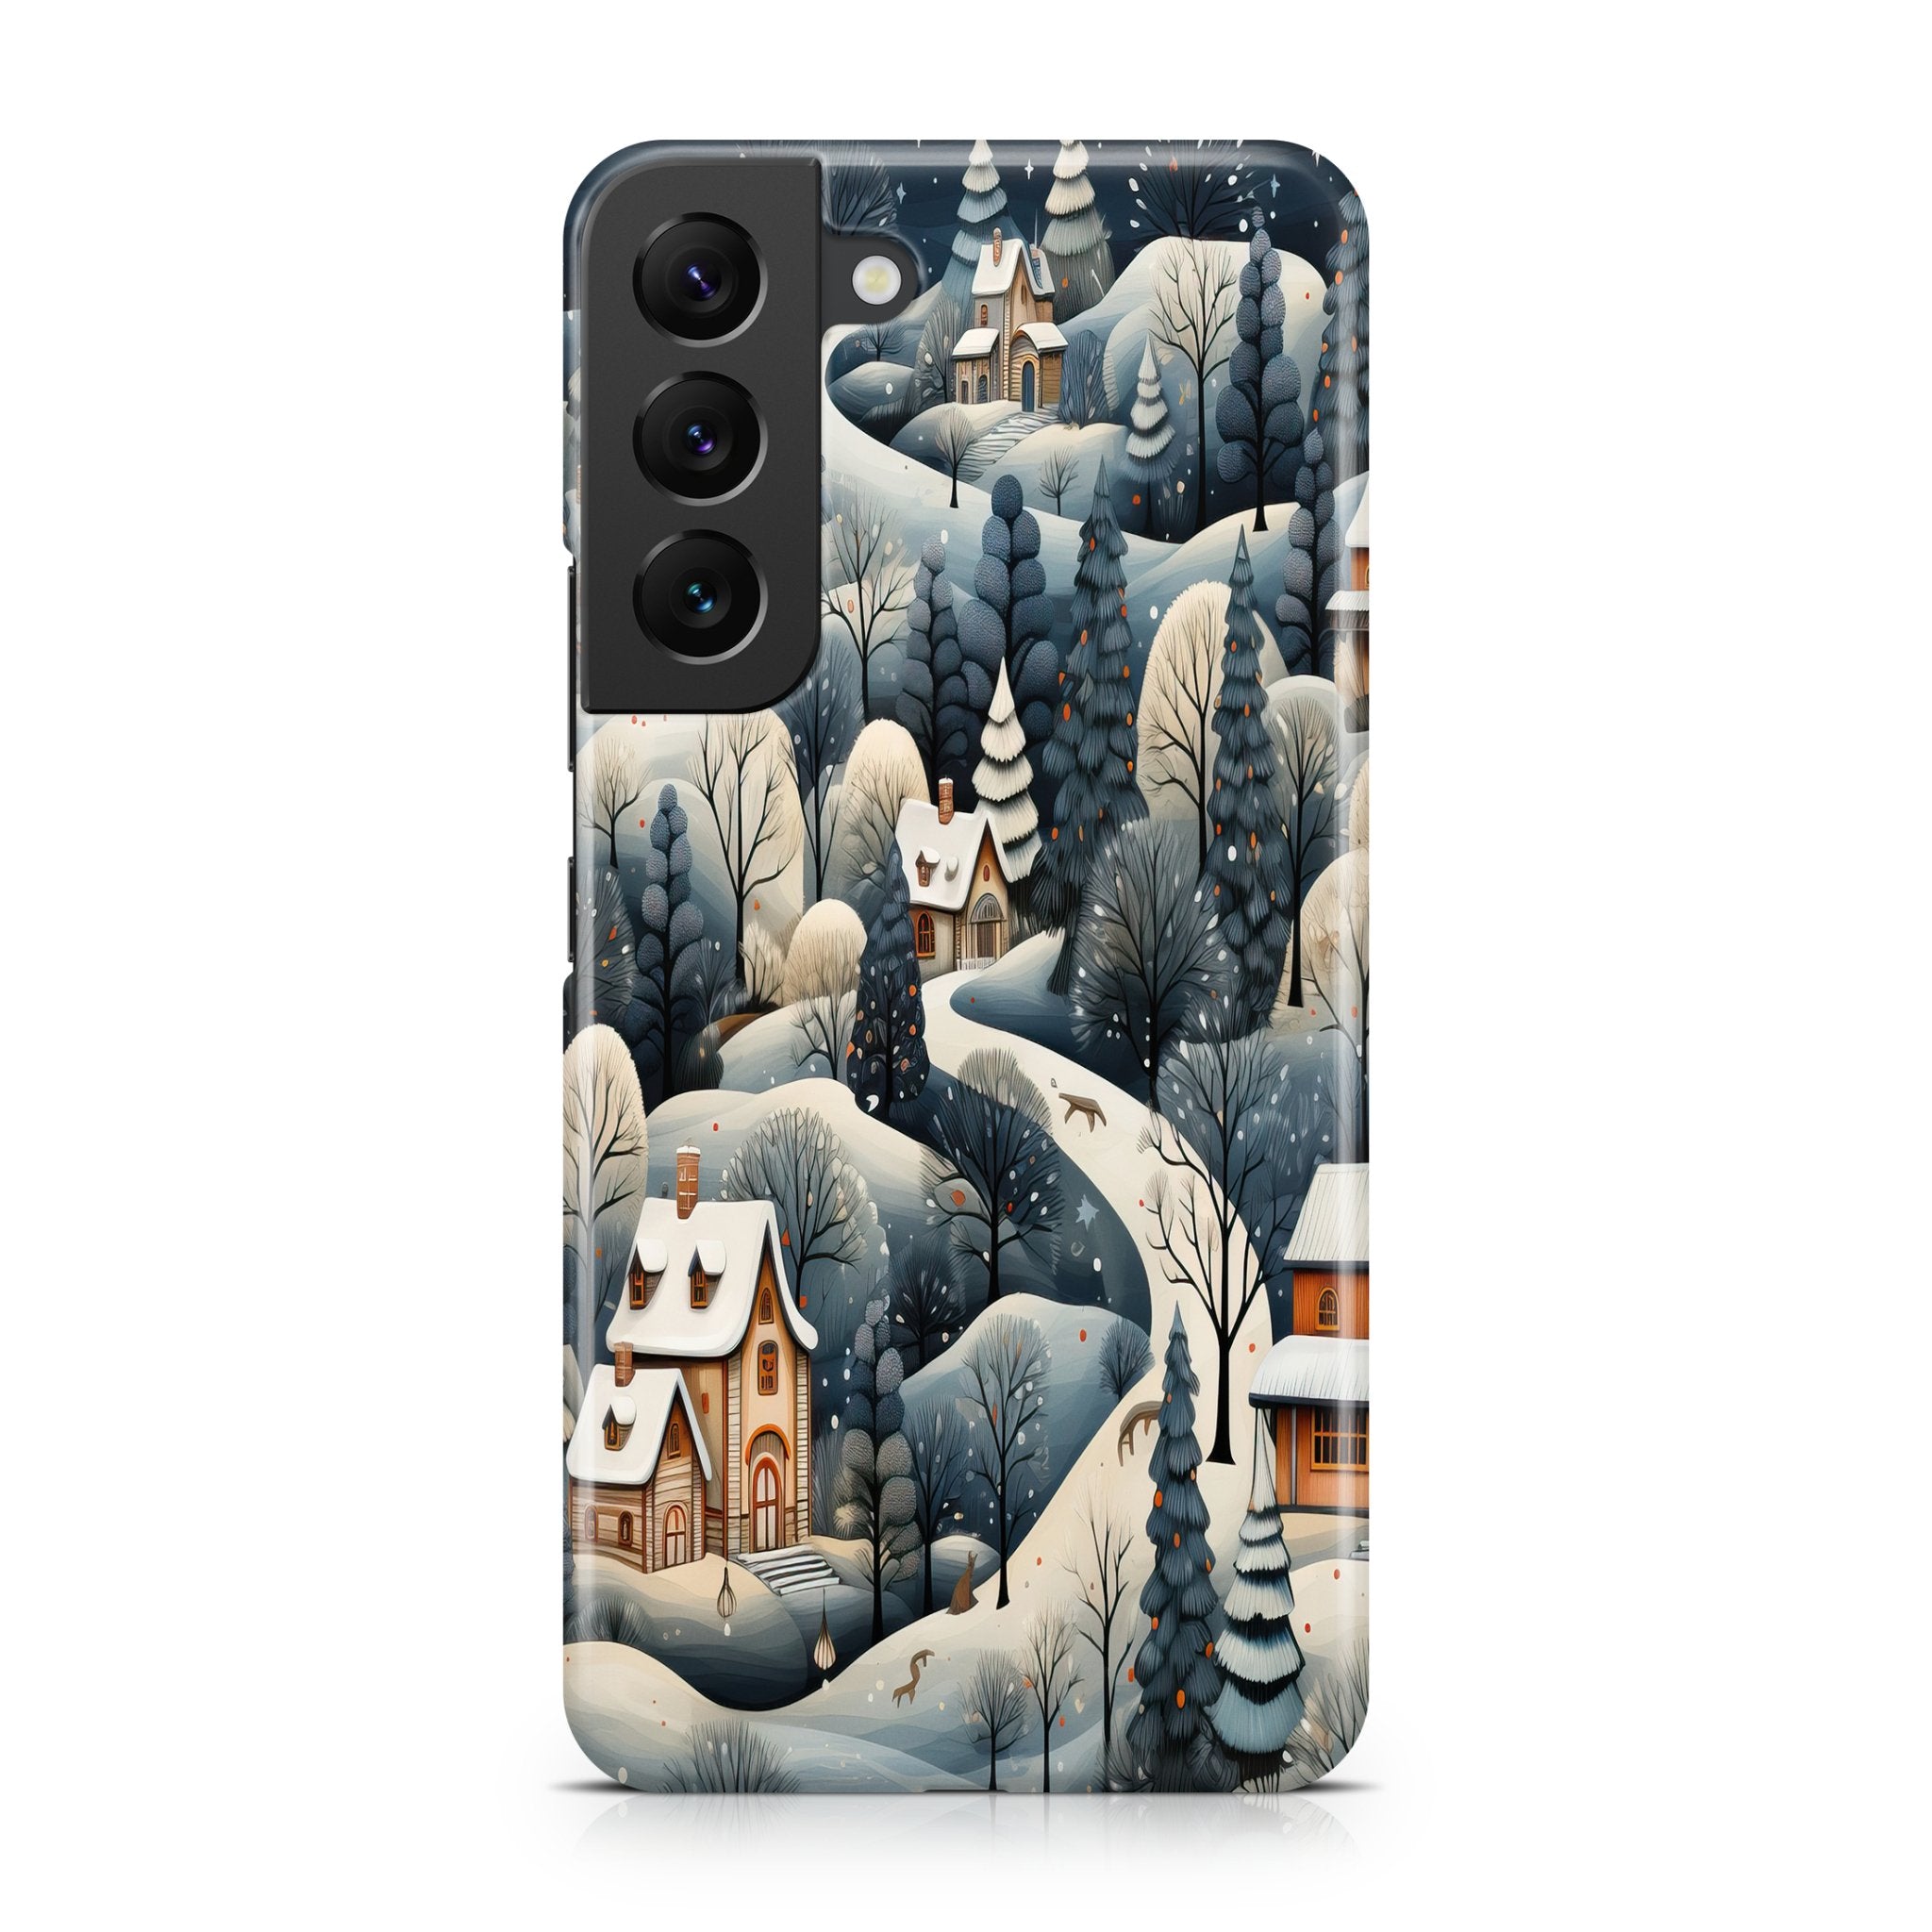 Winter Solstice - Samsung phone case designs by CaseSwagger